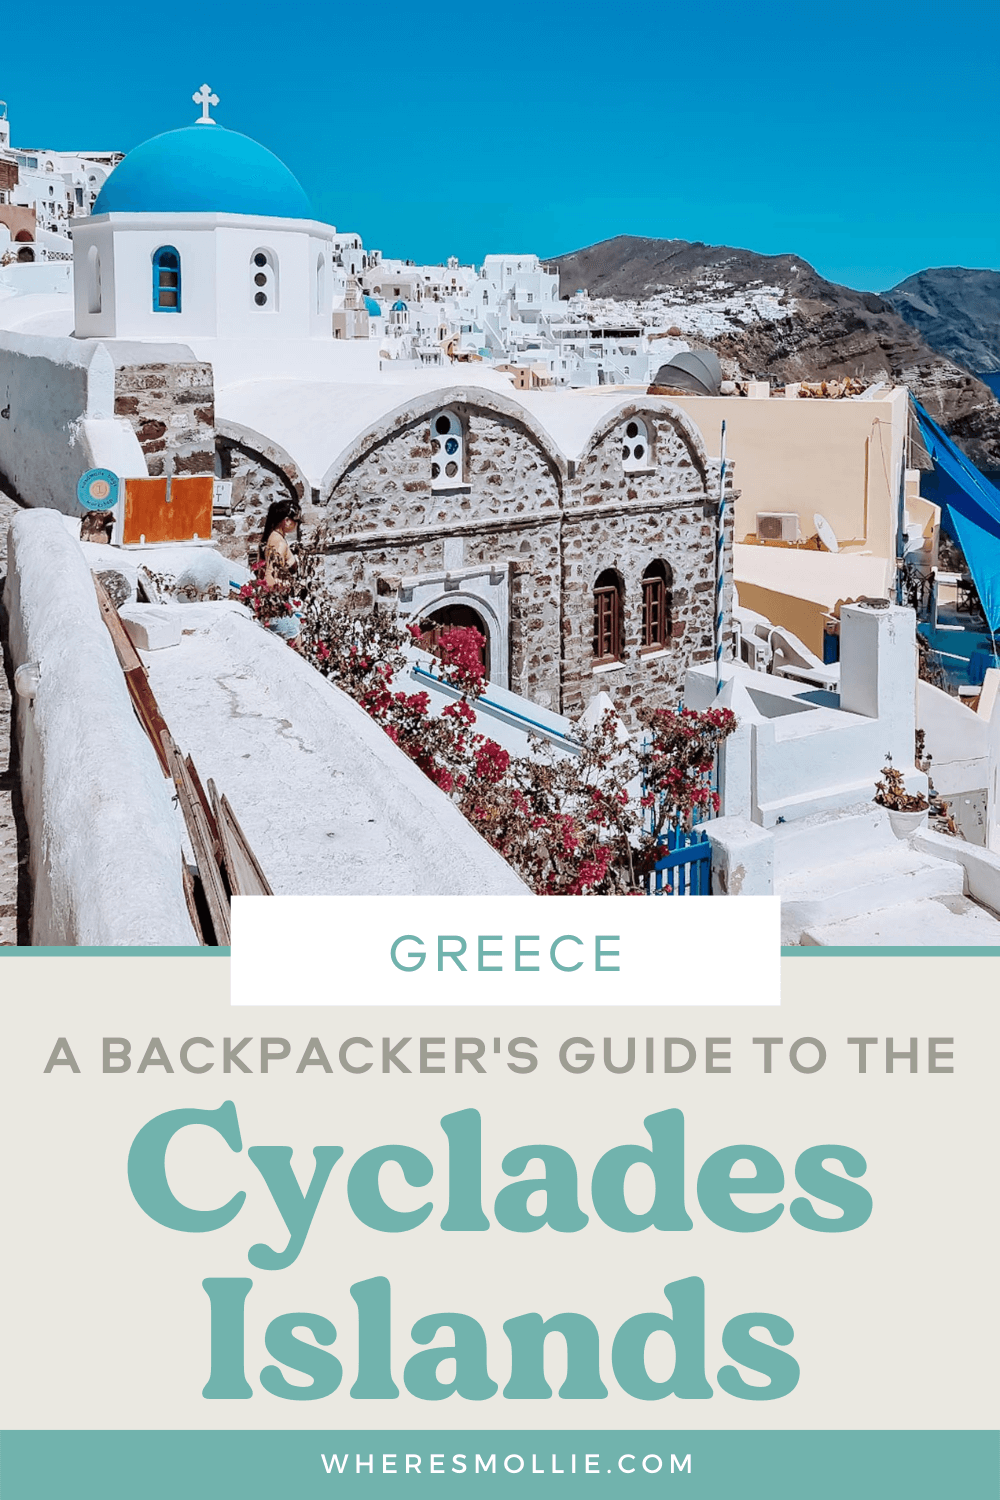 A guide to backpacking the Cyclades Islands, Greece